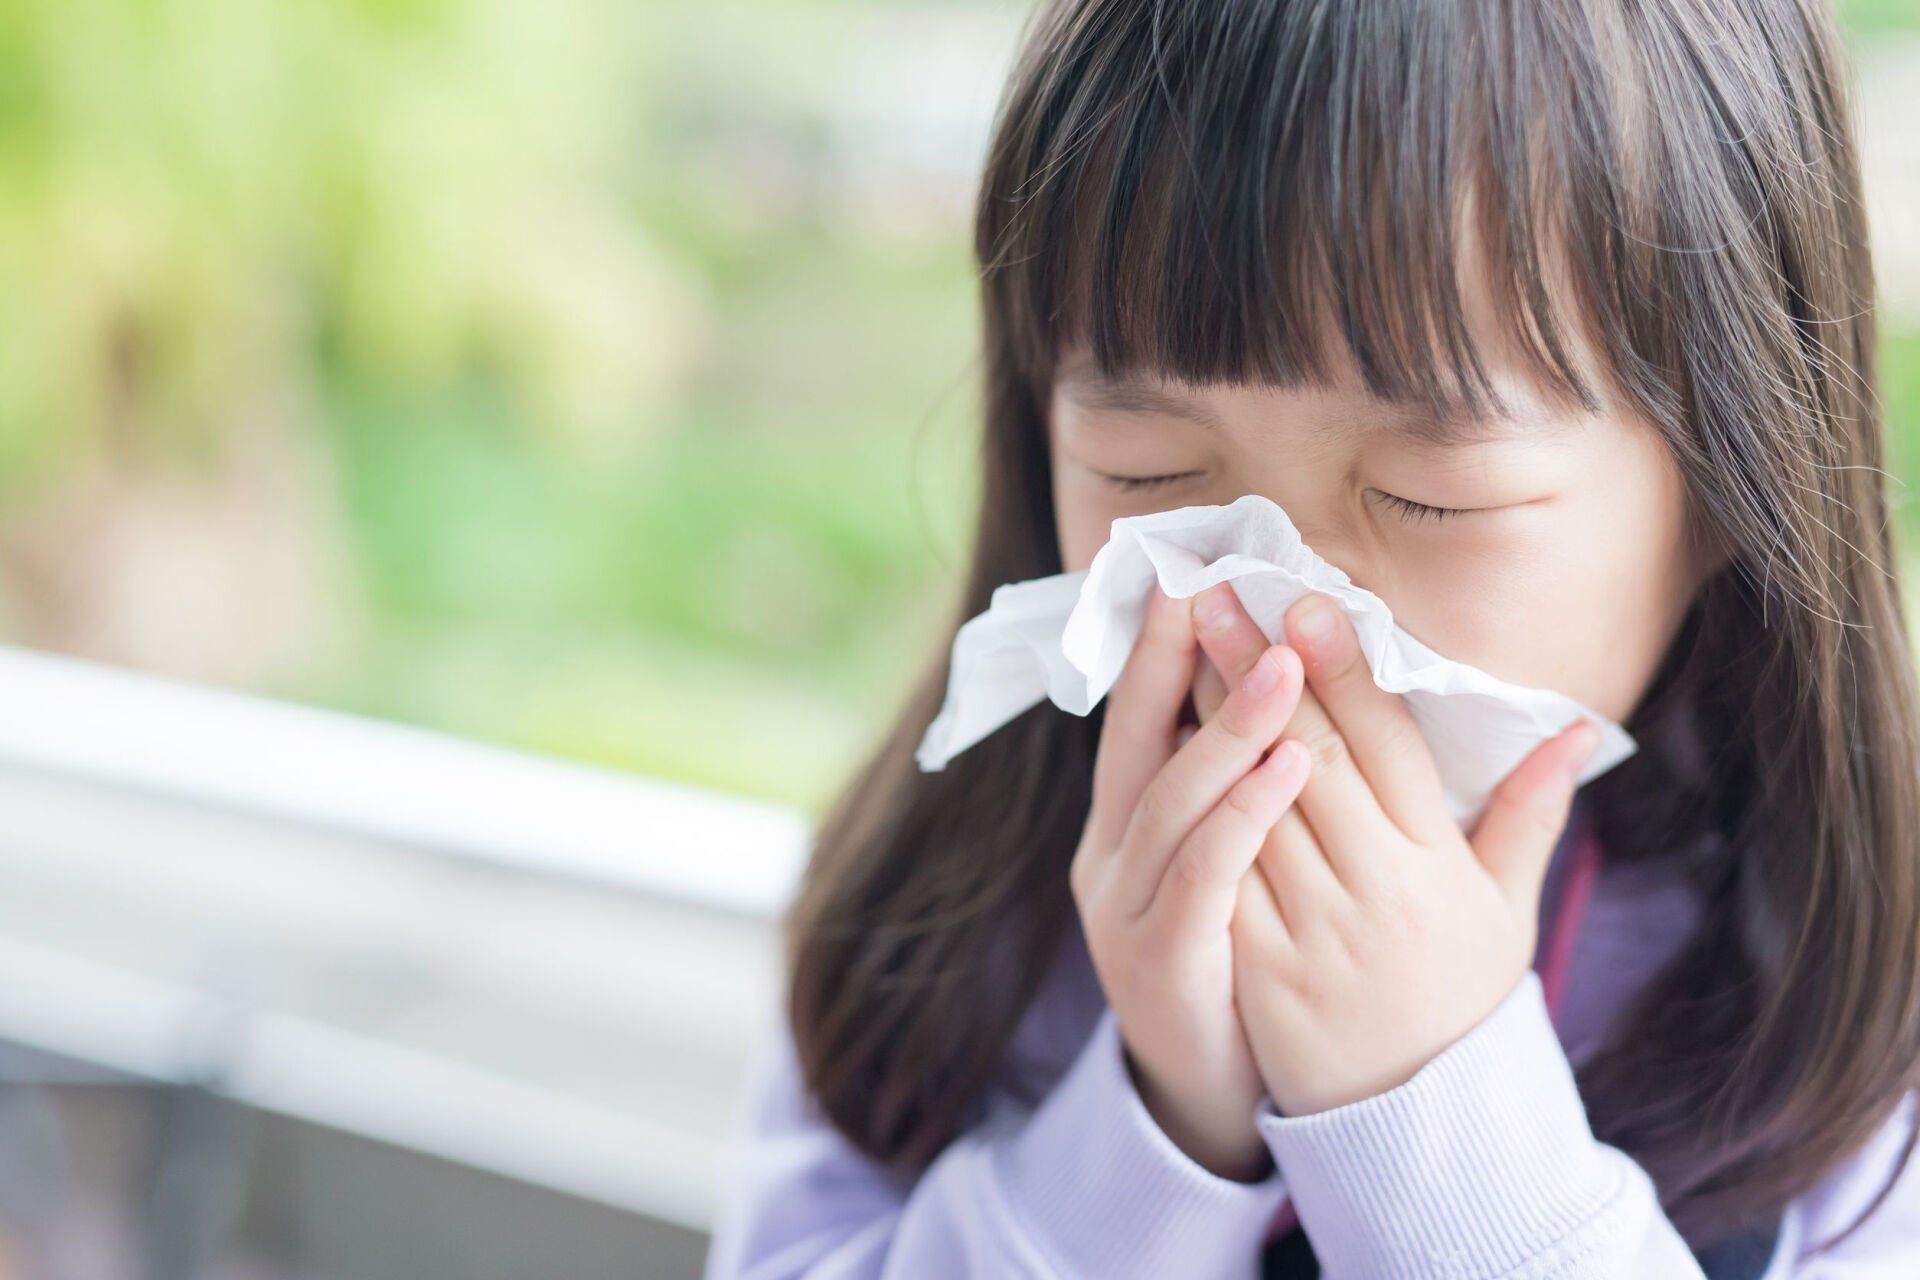 A young girl blowing her nose due to allergy.